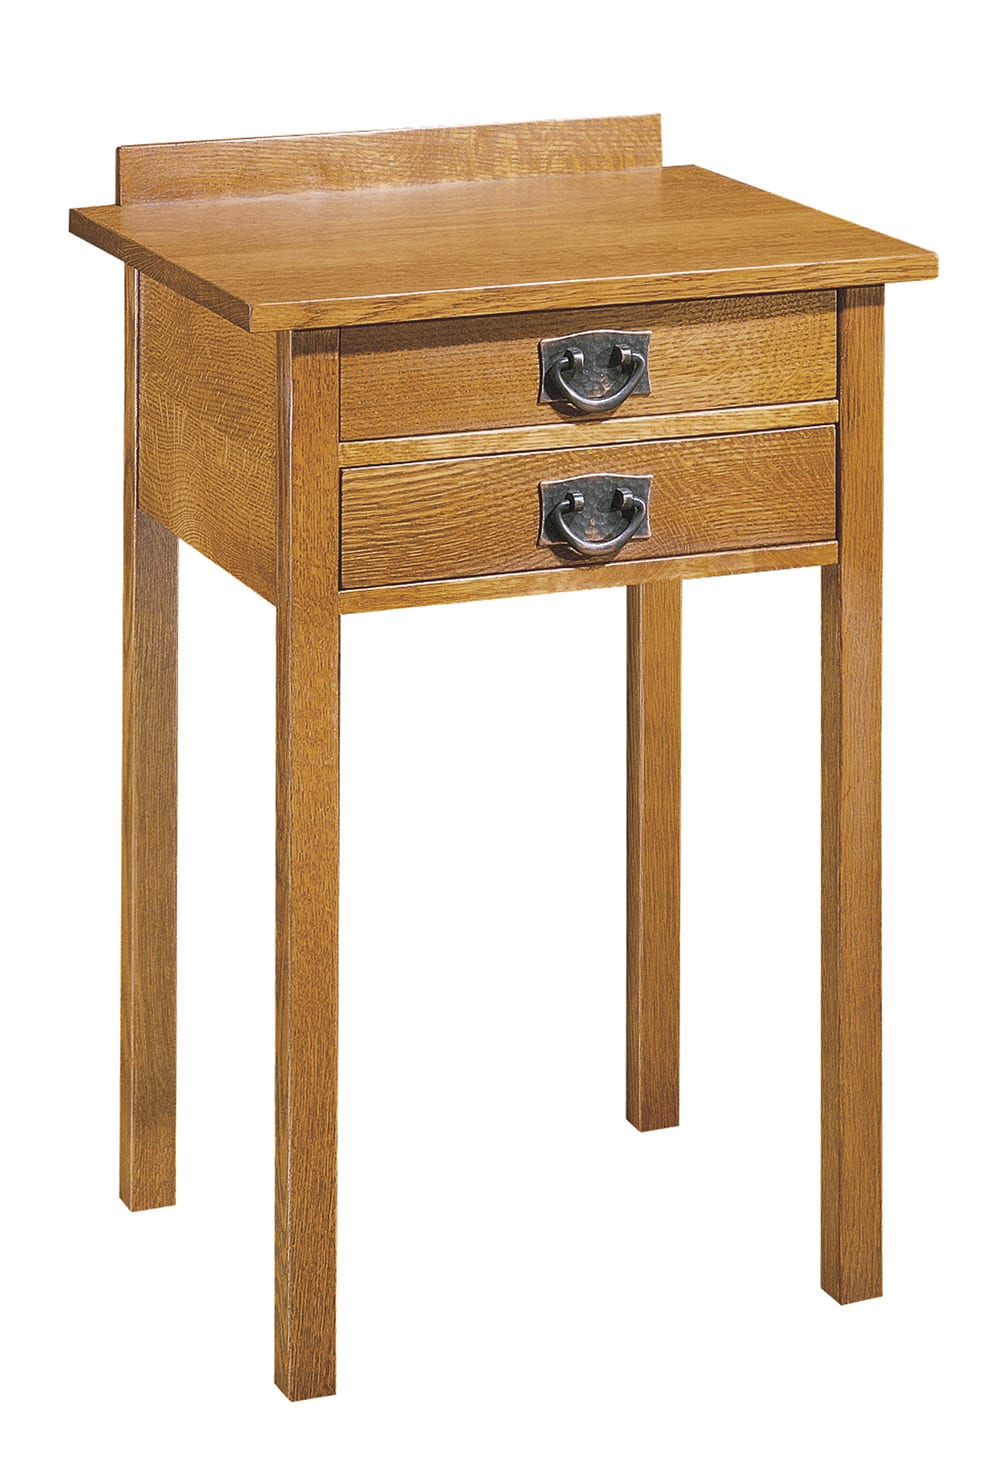 Two-Drawer Tall Nightstand - Stickley Brand